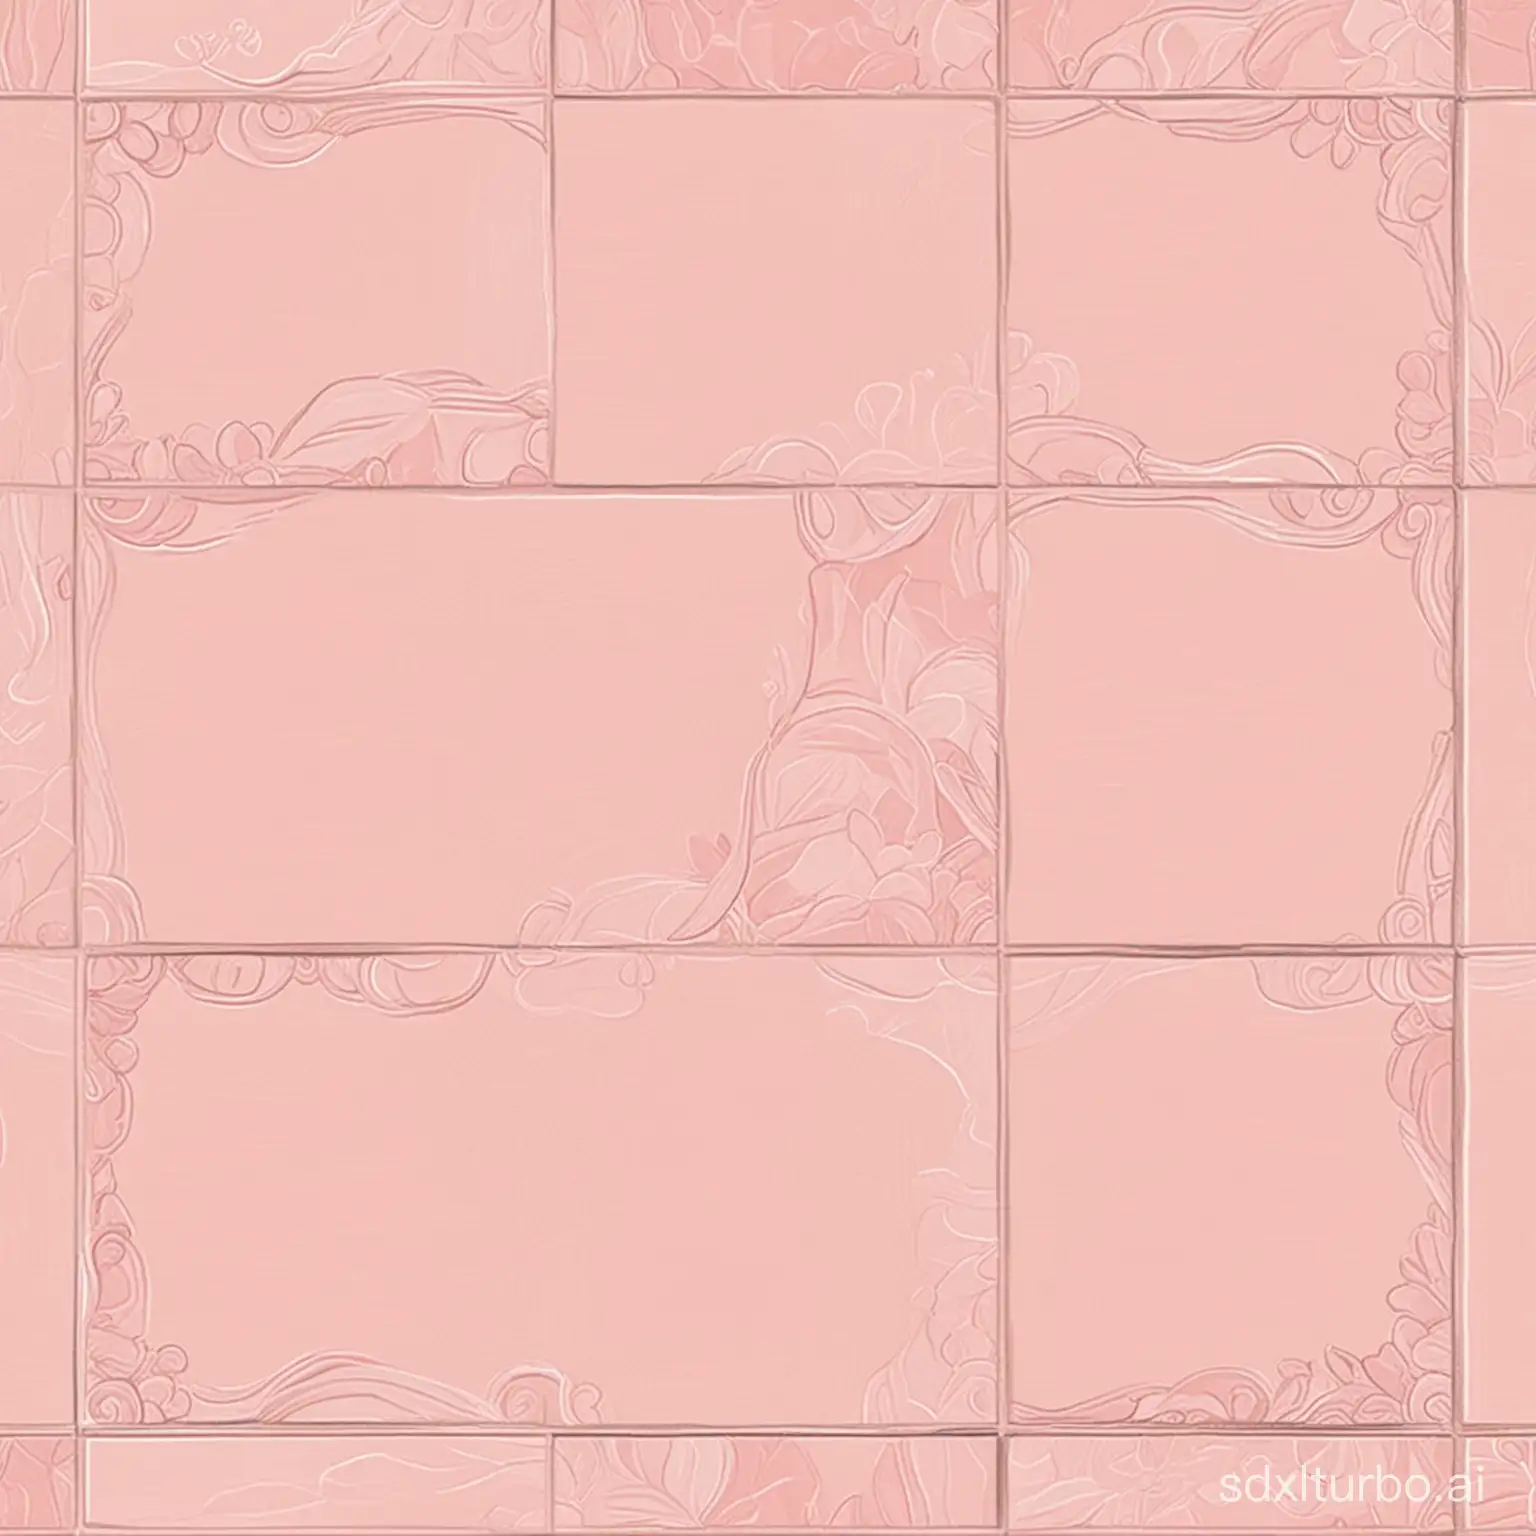 tile panel with hand-drawn colors, graphics, vector, outline, background pale pink